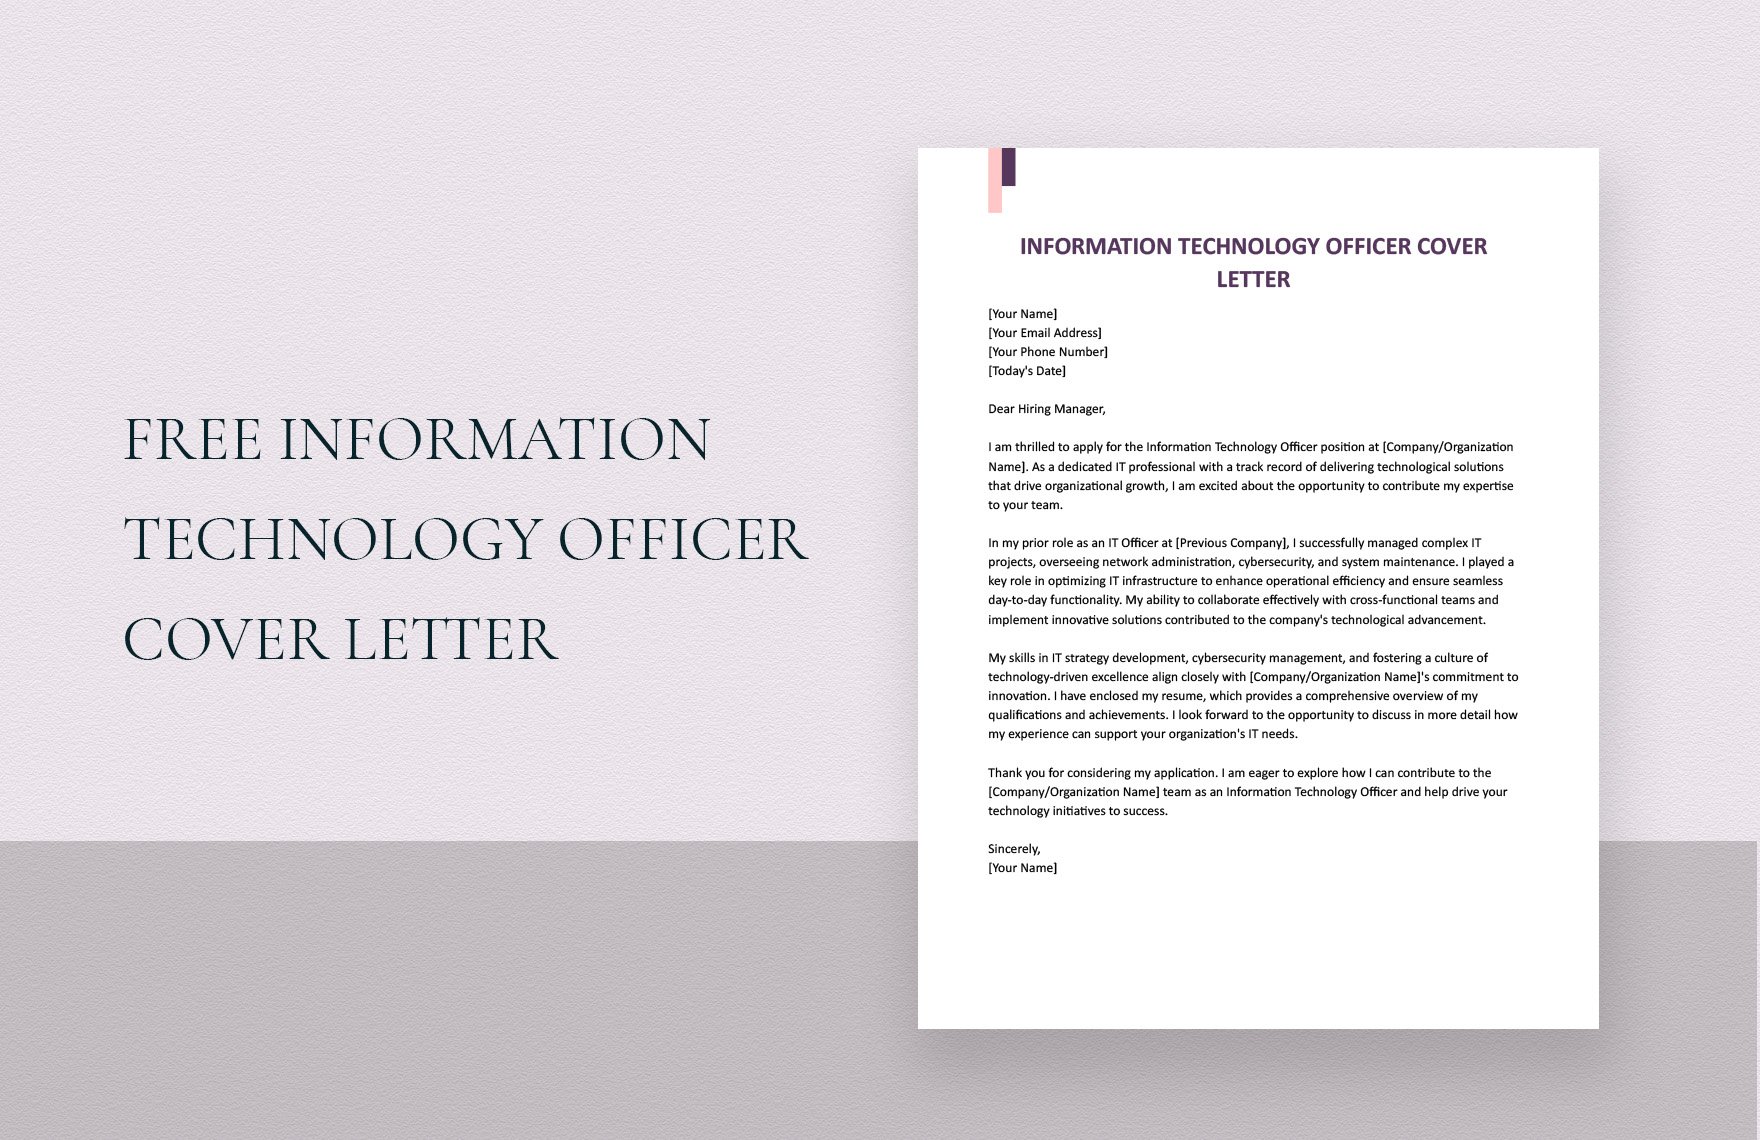 Information Technology Officer Cover Letter in Word, Google Docs